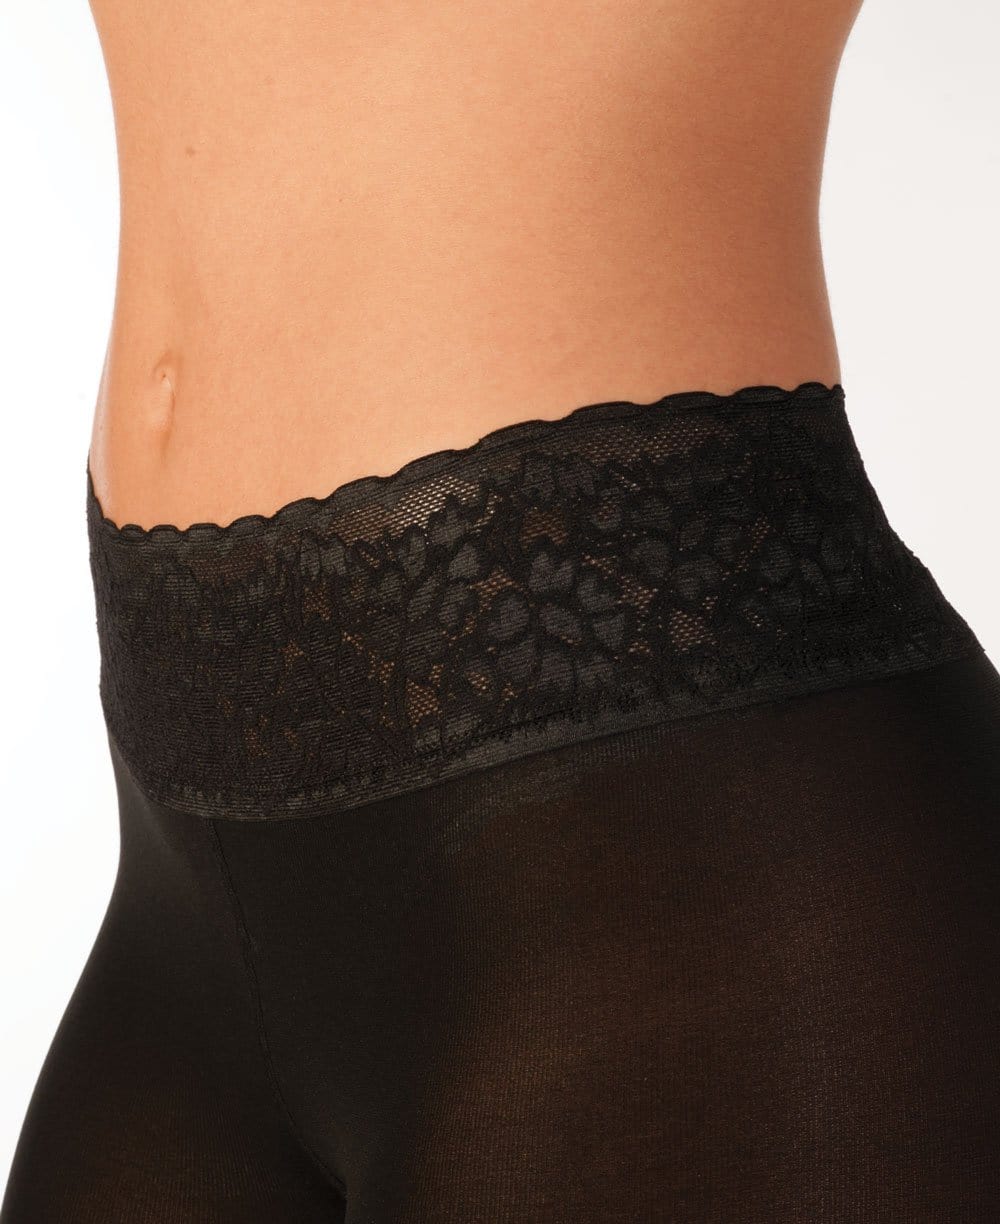 Black Opaque Tights with Comfort Waistband